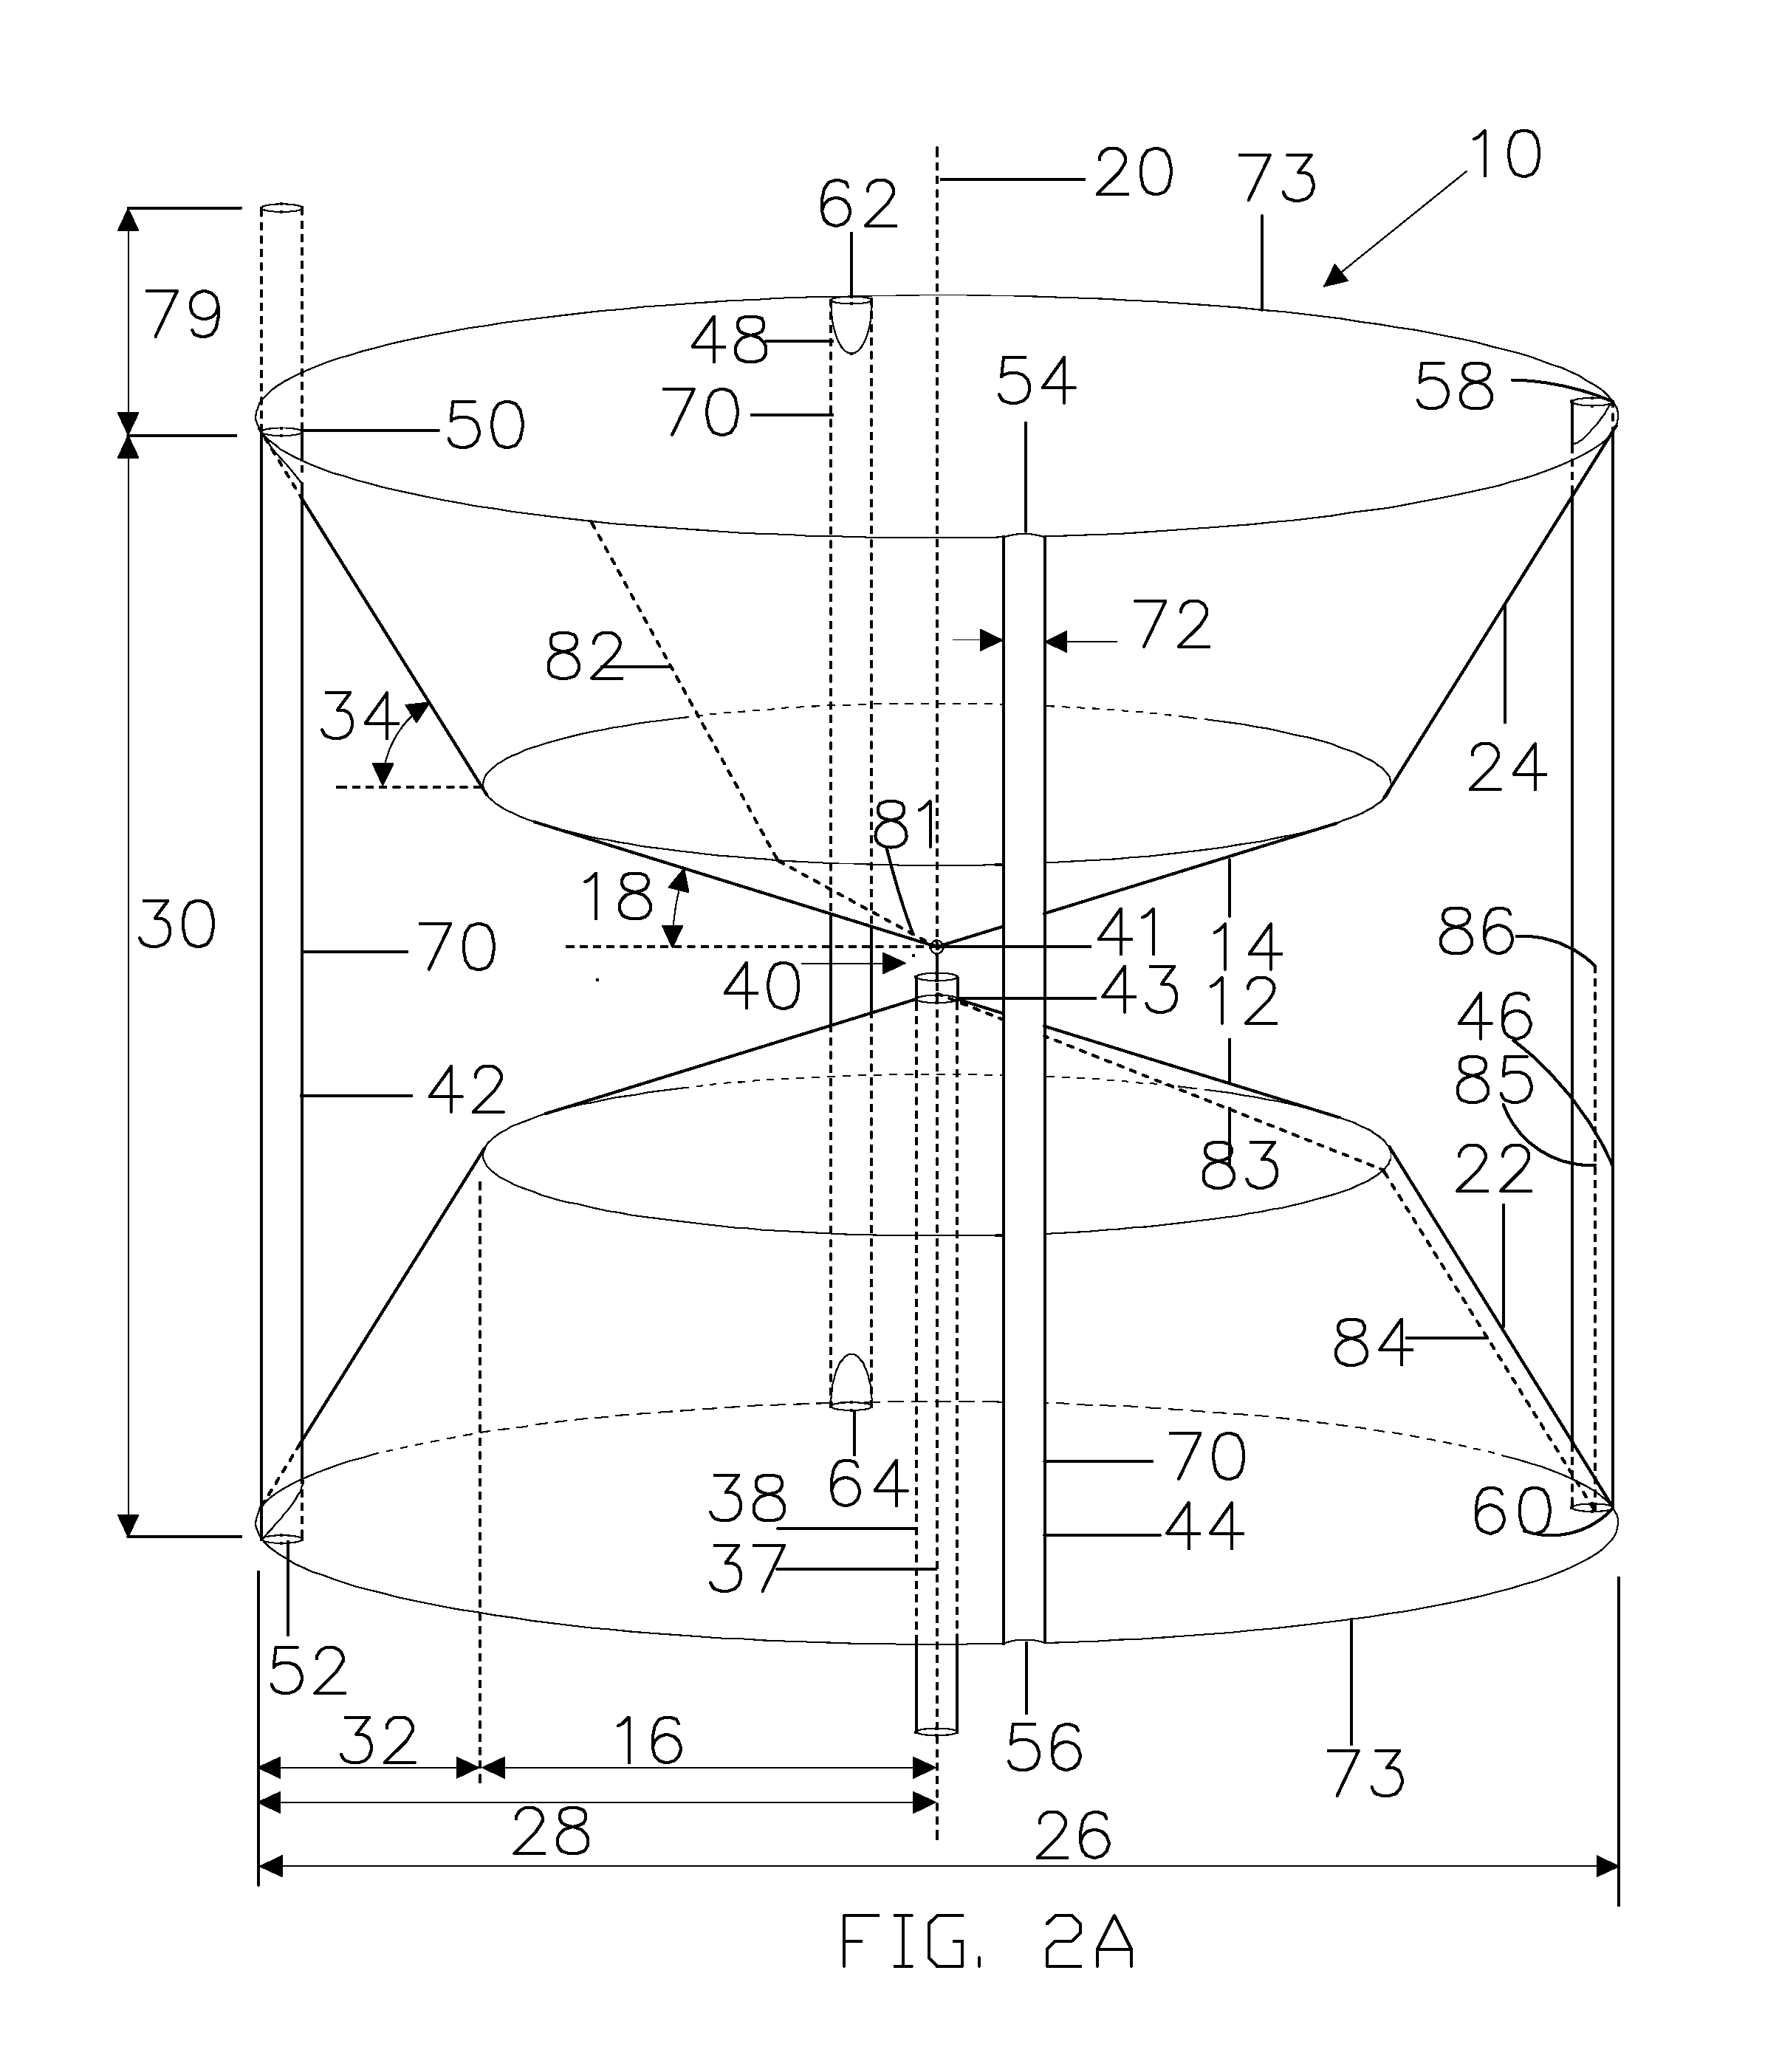 Inductively shorted bicone fed tapered dipole antenna